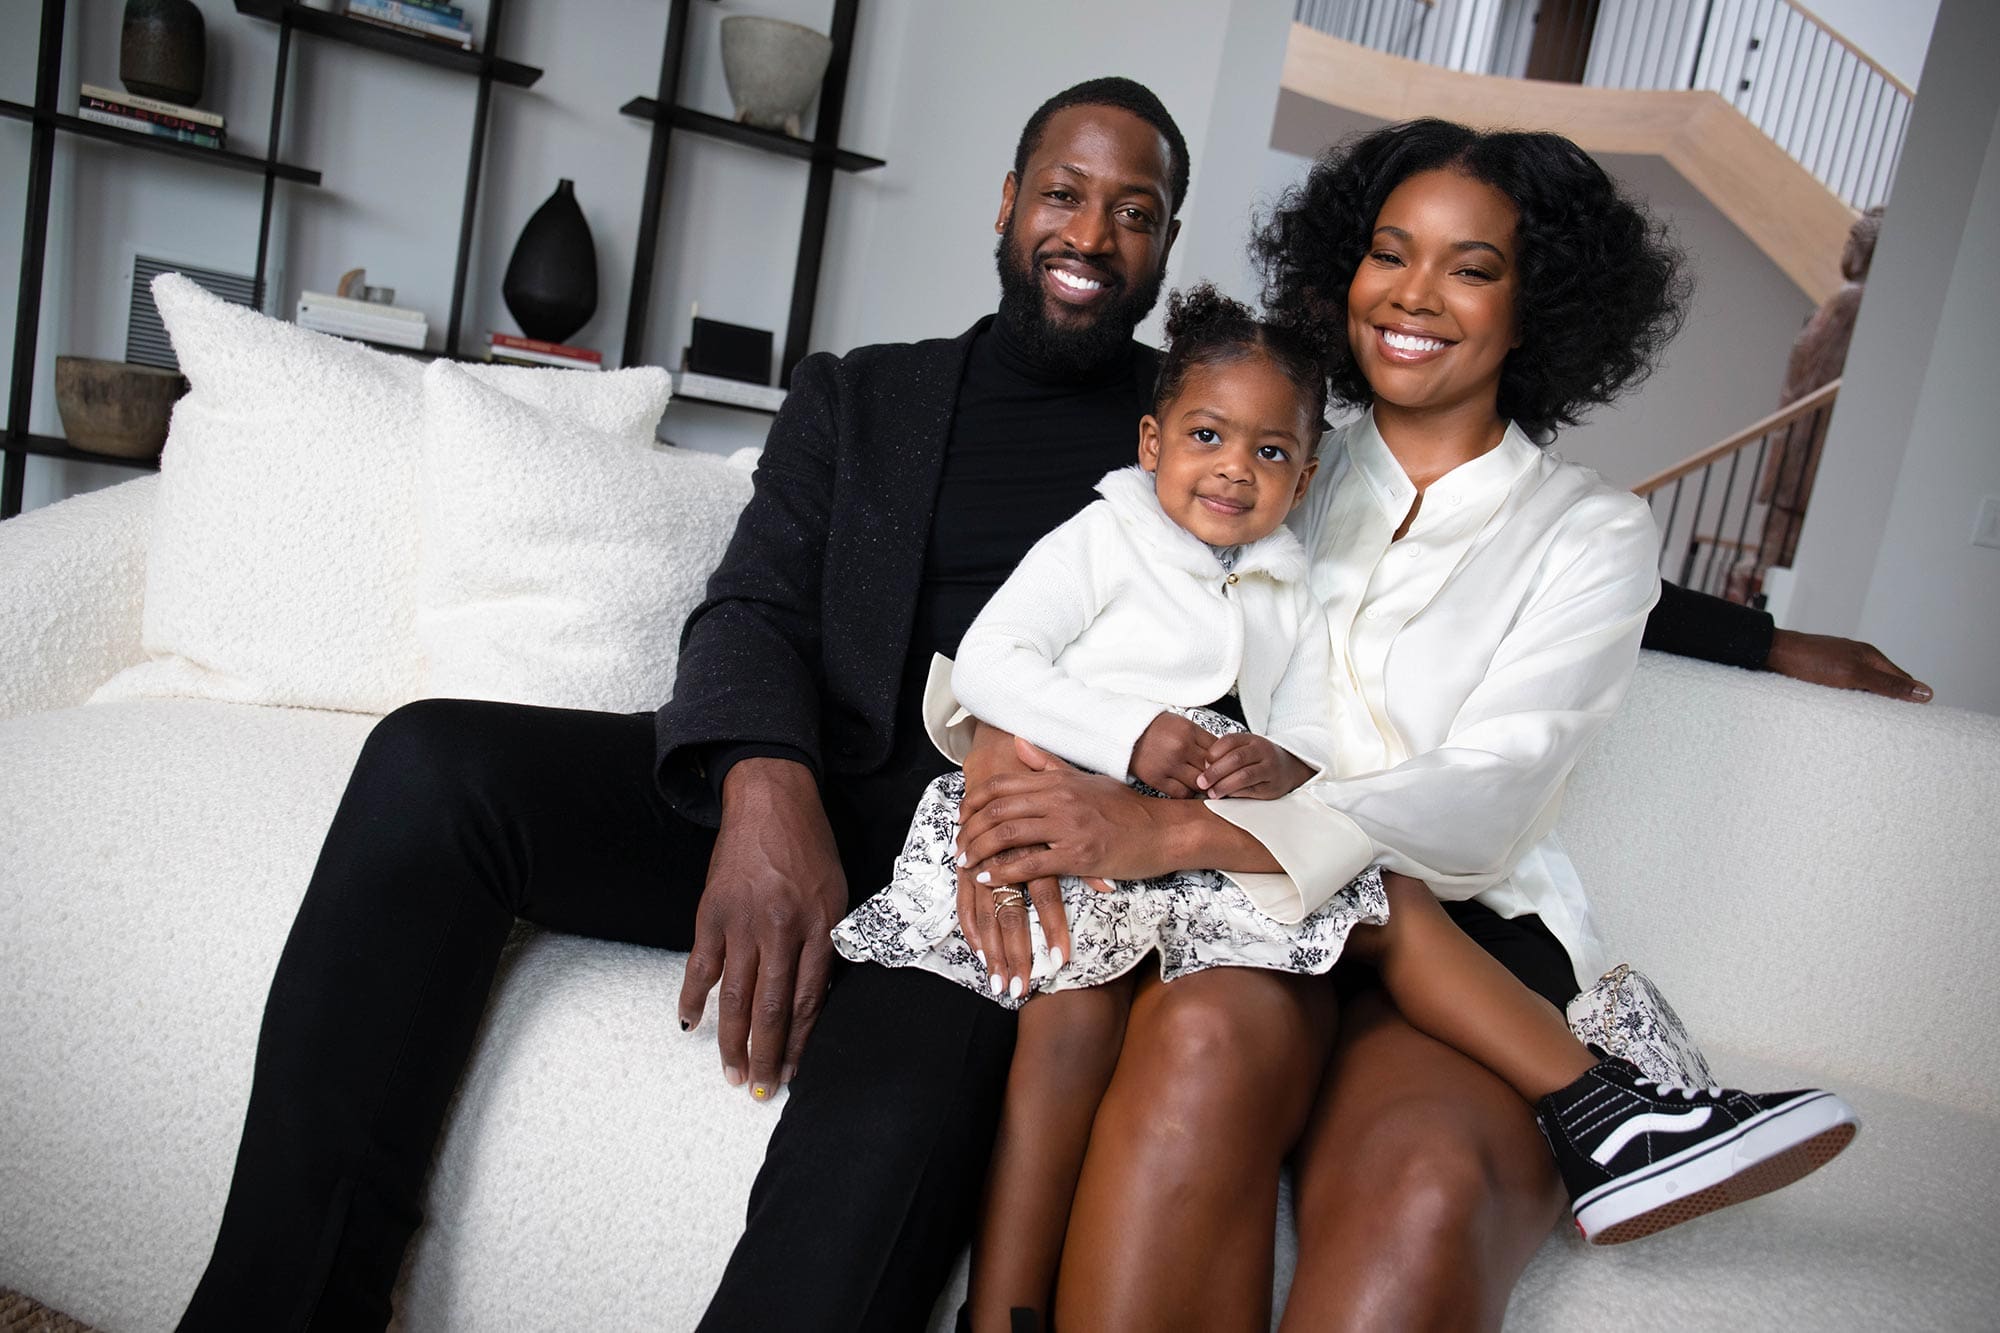 gabrielle-union-celebrates-fathers-day-with-this-impressive-video